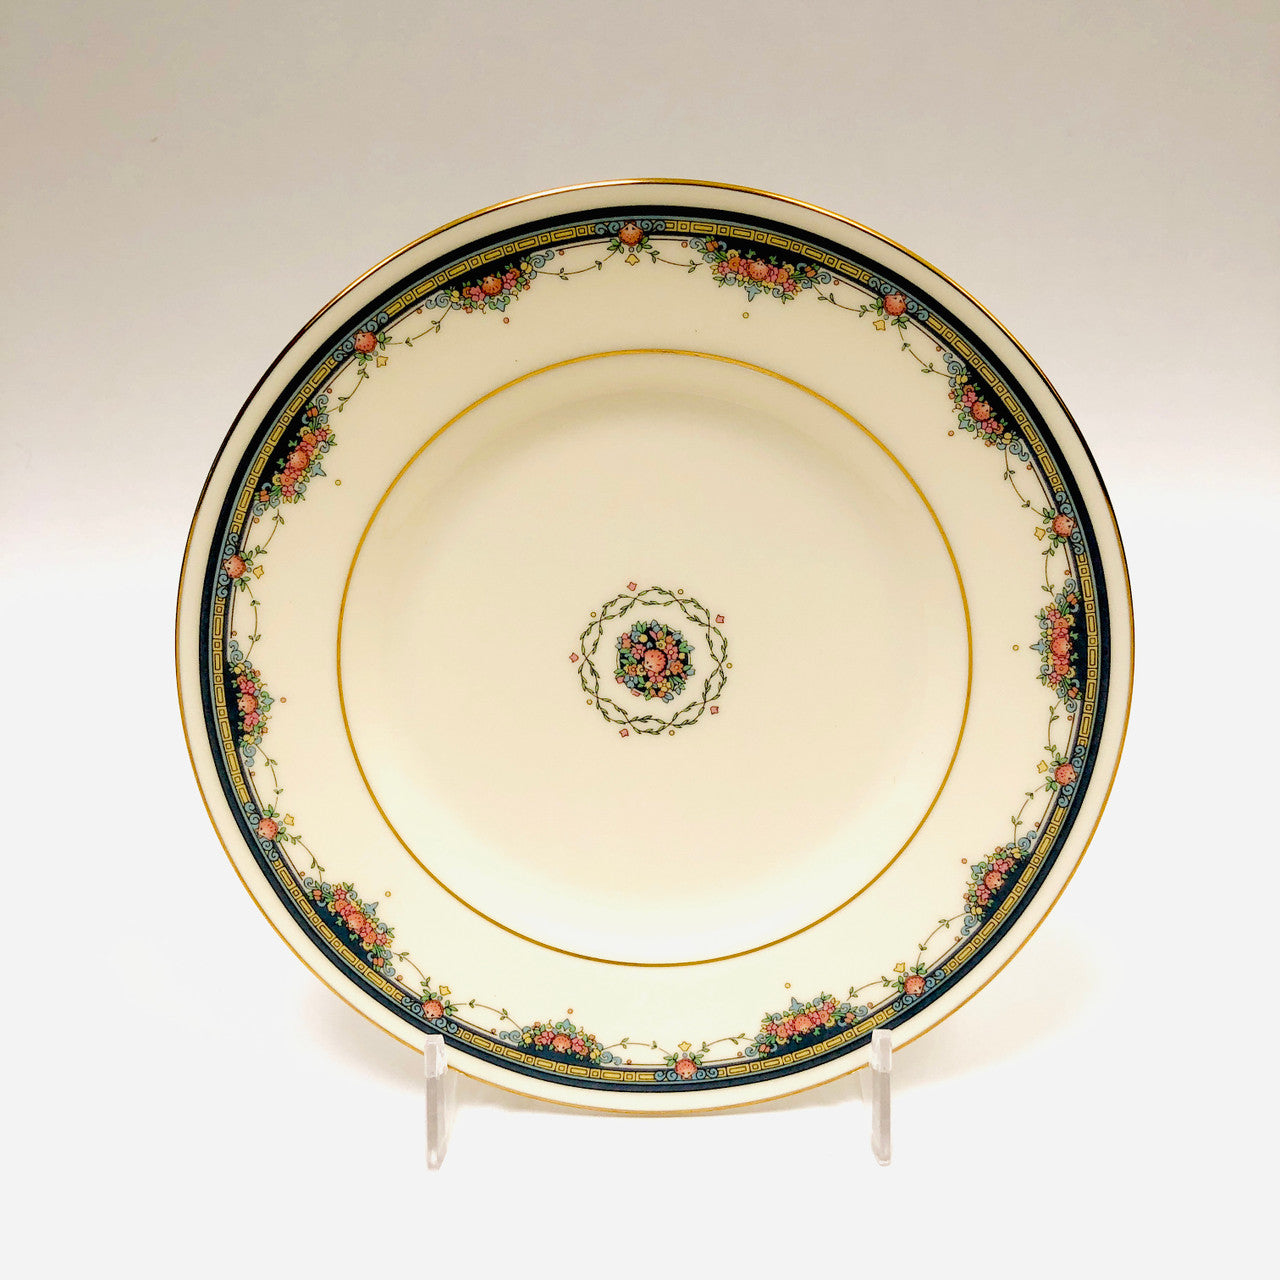 Royal Doulton, Albany, Bread and Butter Plate, Vintage, Fine Bone China, Ceramic, England